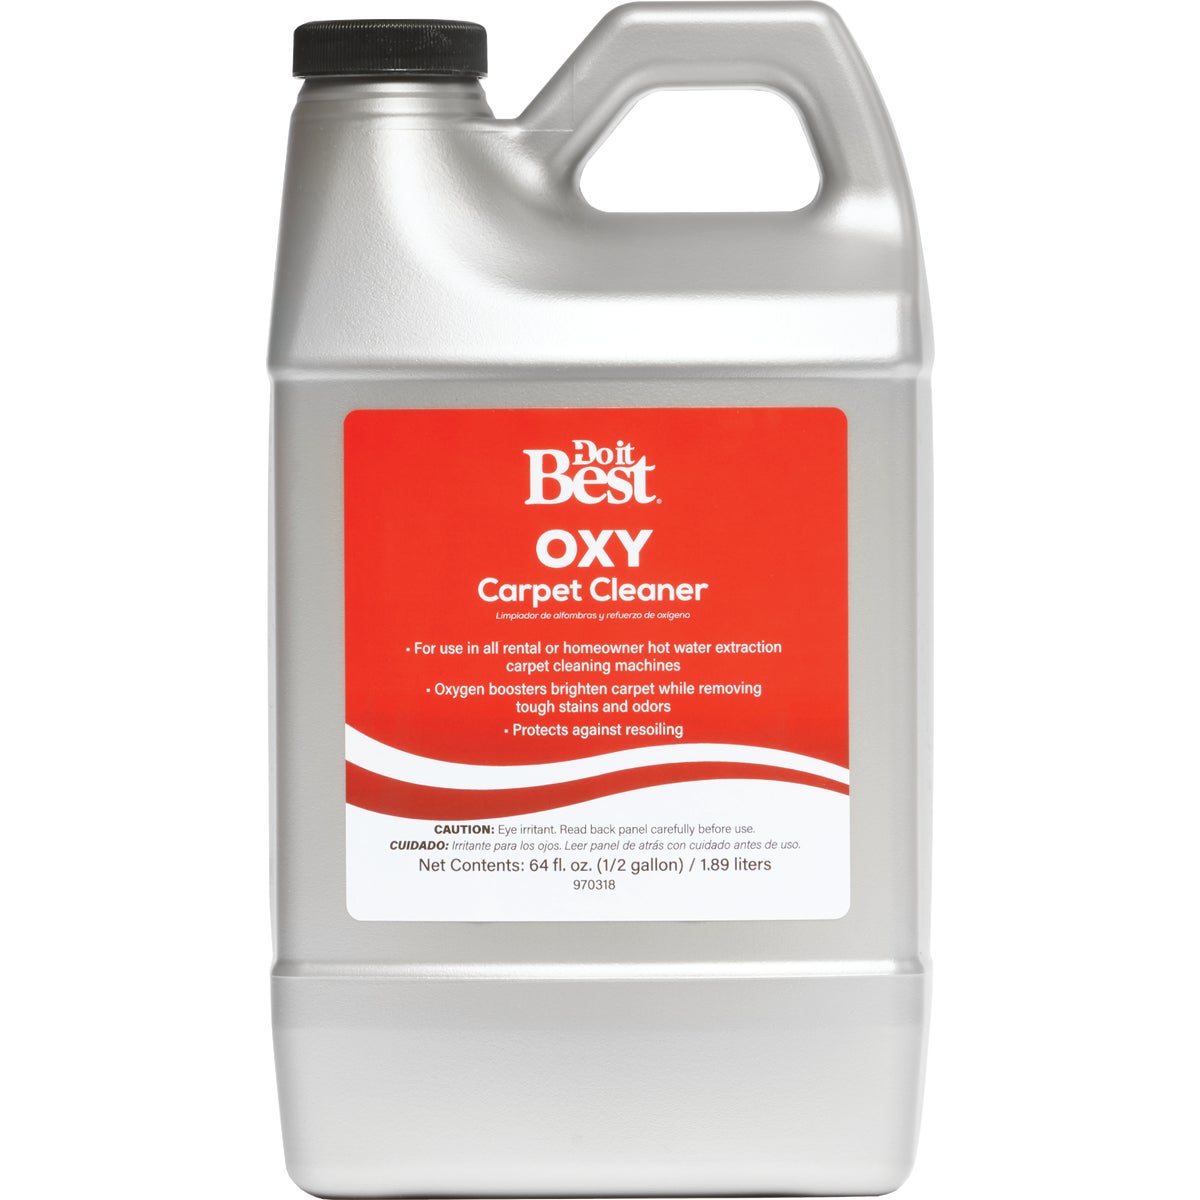 Item 970318, Oxygen boosters brighten carpet while removing tough stains and odors.